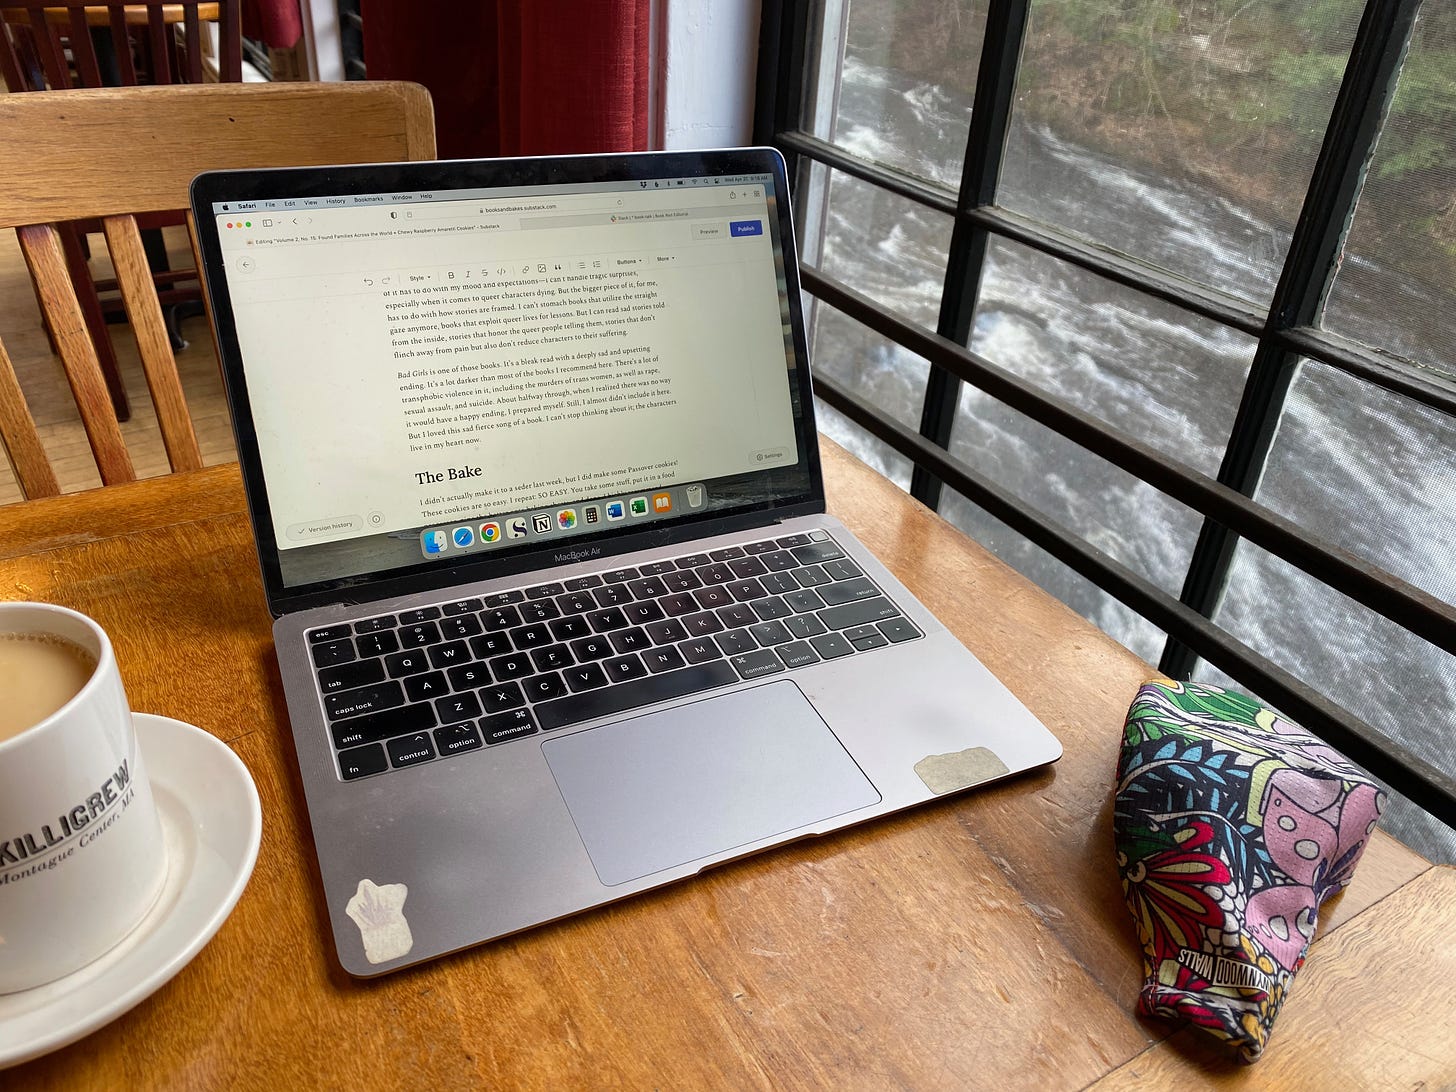 A laptop sits open a wooden cafe table next to a mug of tea and a colorful mask. Outside the window is a rushing river.